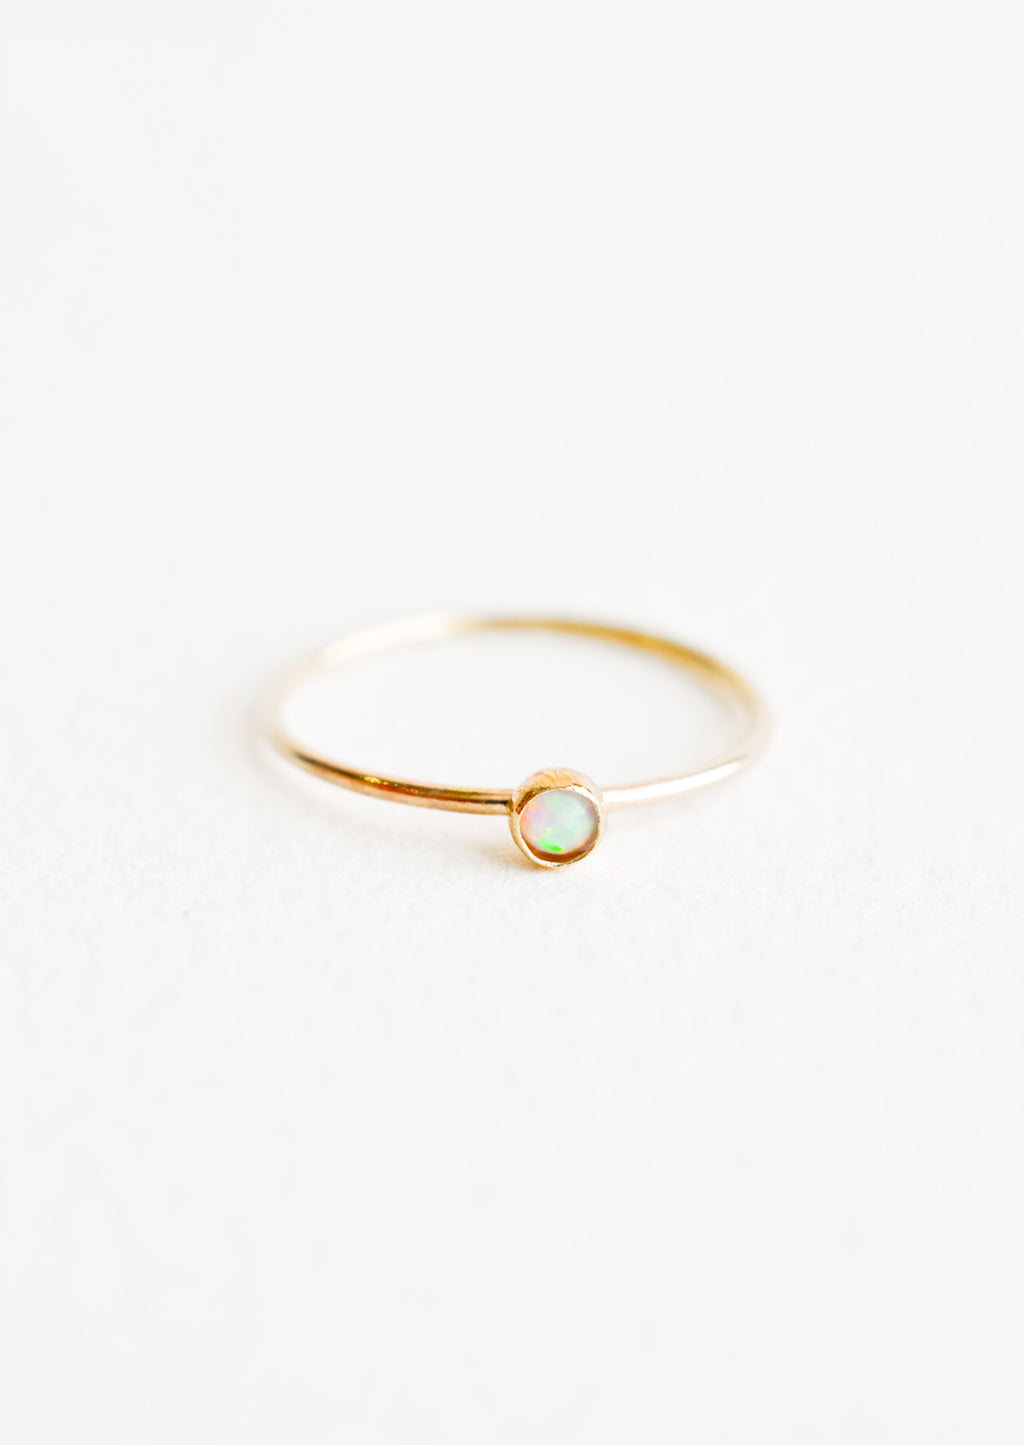 Opal / Size 5: Yellow gold ring with slim band and small white opal stone.